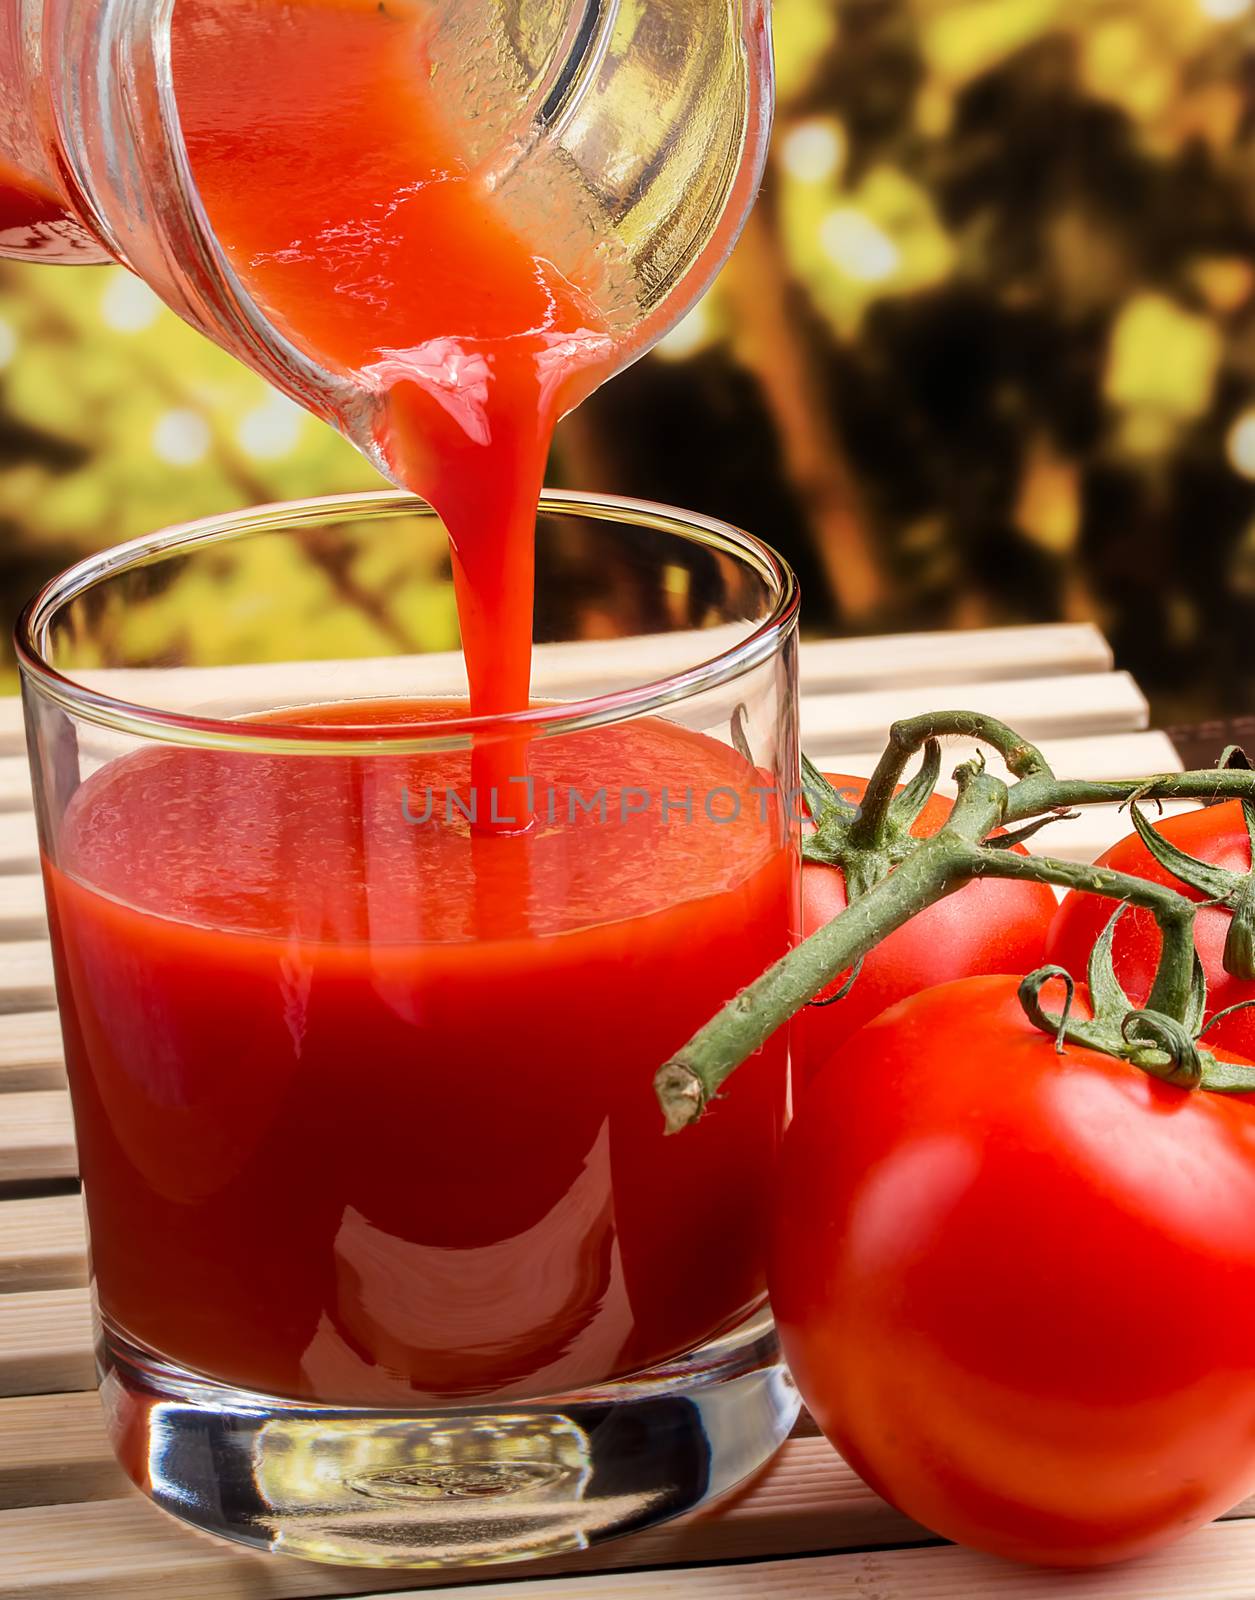 Juice And Tomato Represents Refreshing Drinking And Refresh  by stuartmiles